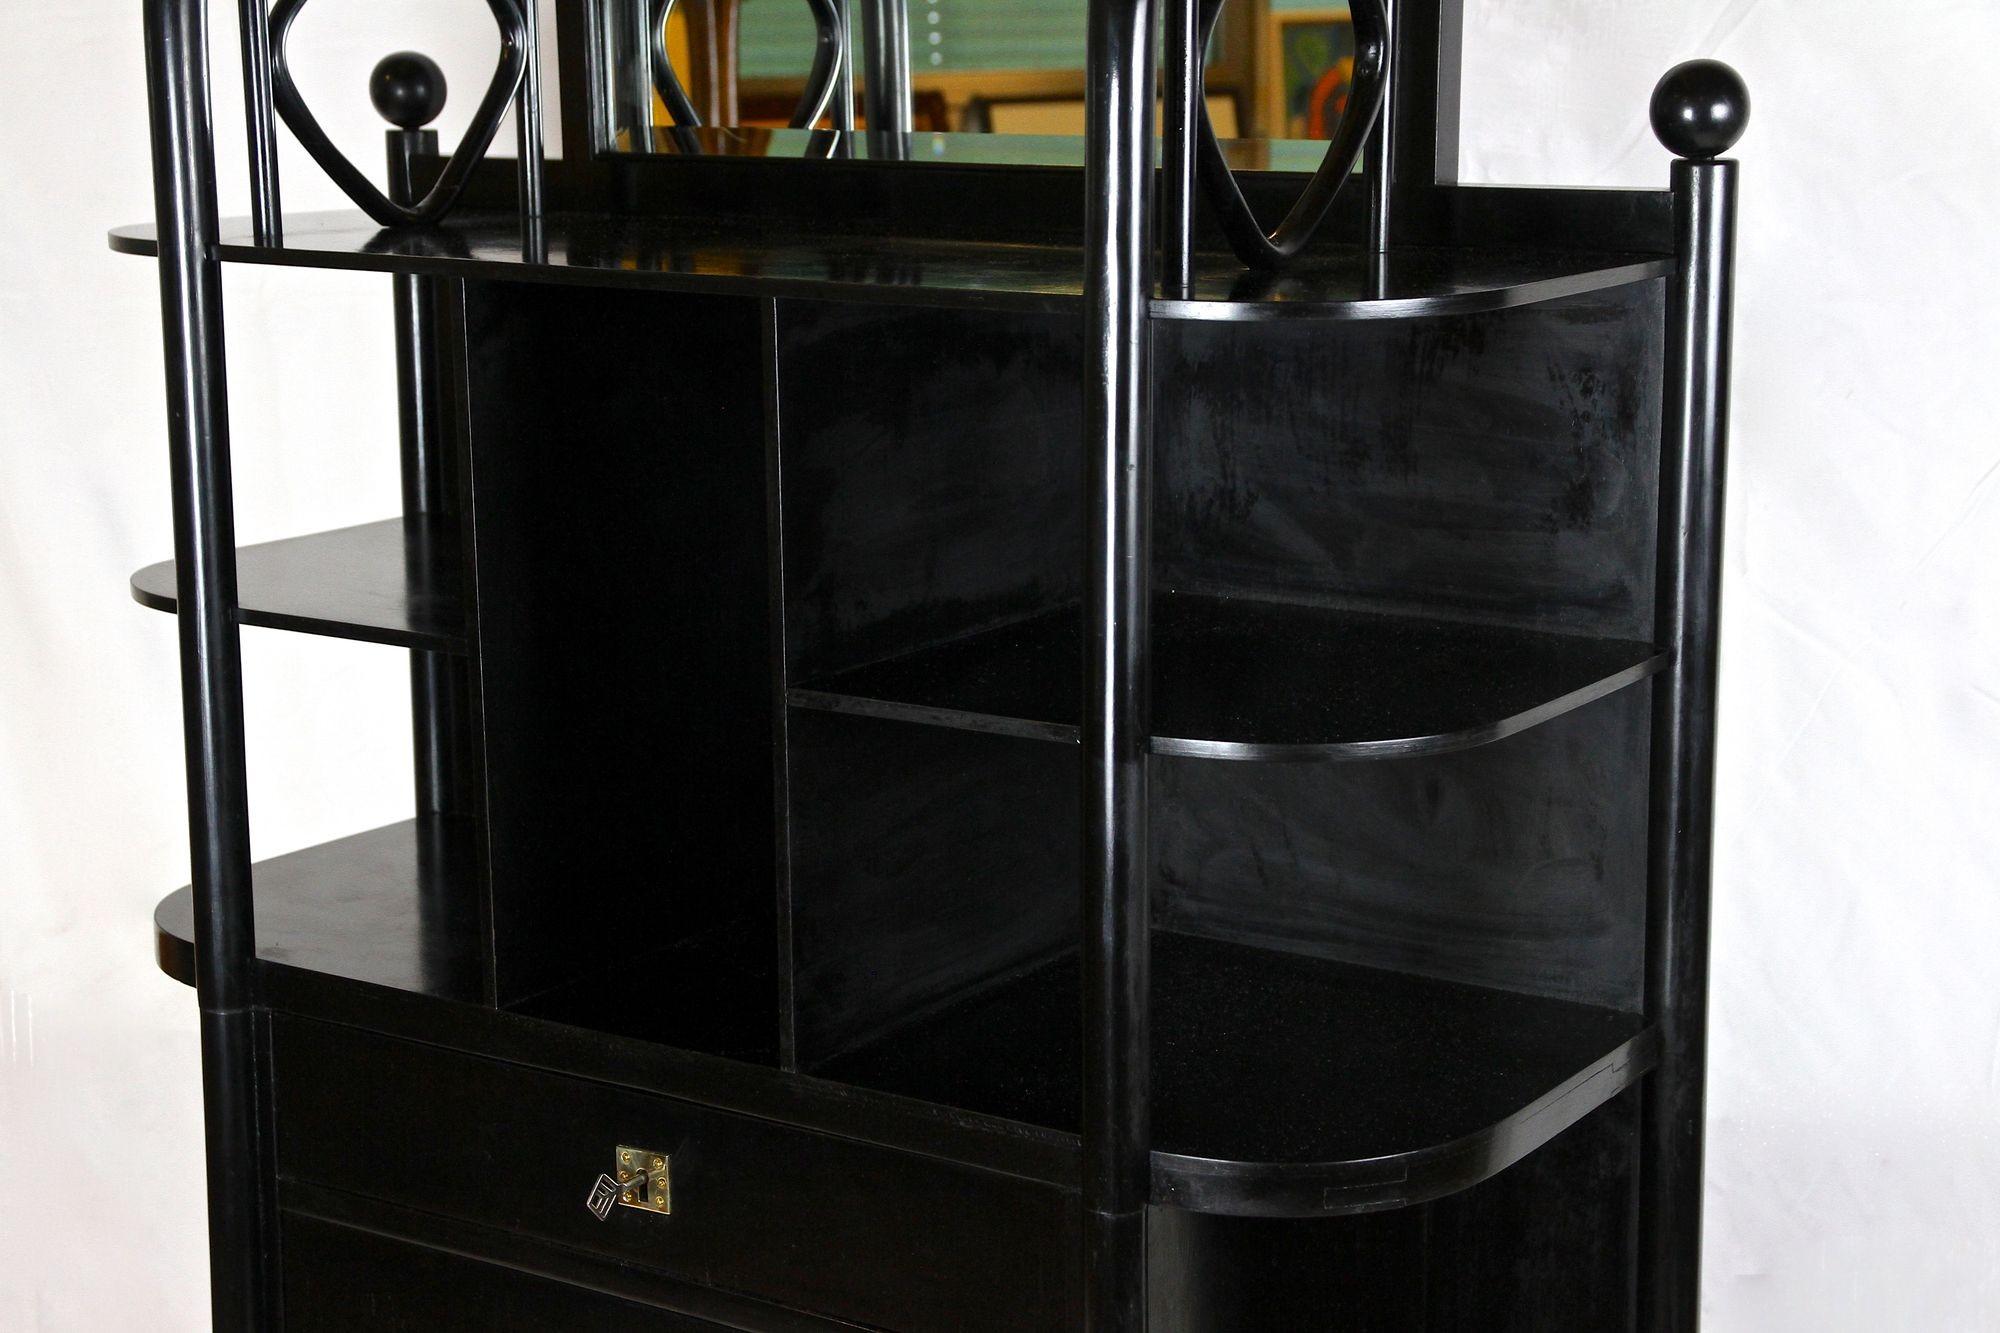 Black Art Nouveau Display Cabinet by Josef Hoffmann for Thonet, AT ca. 1905 For Sale 3